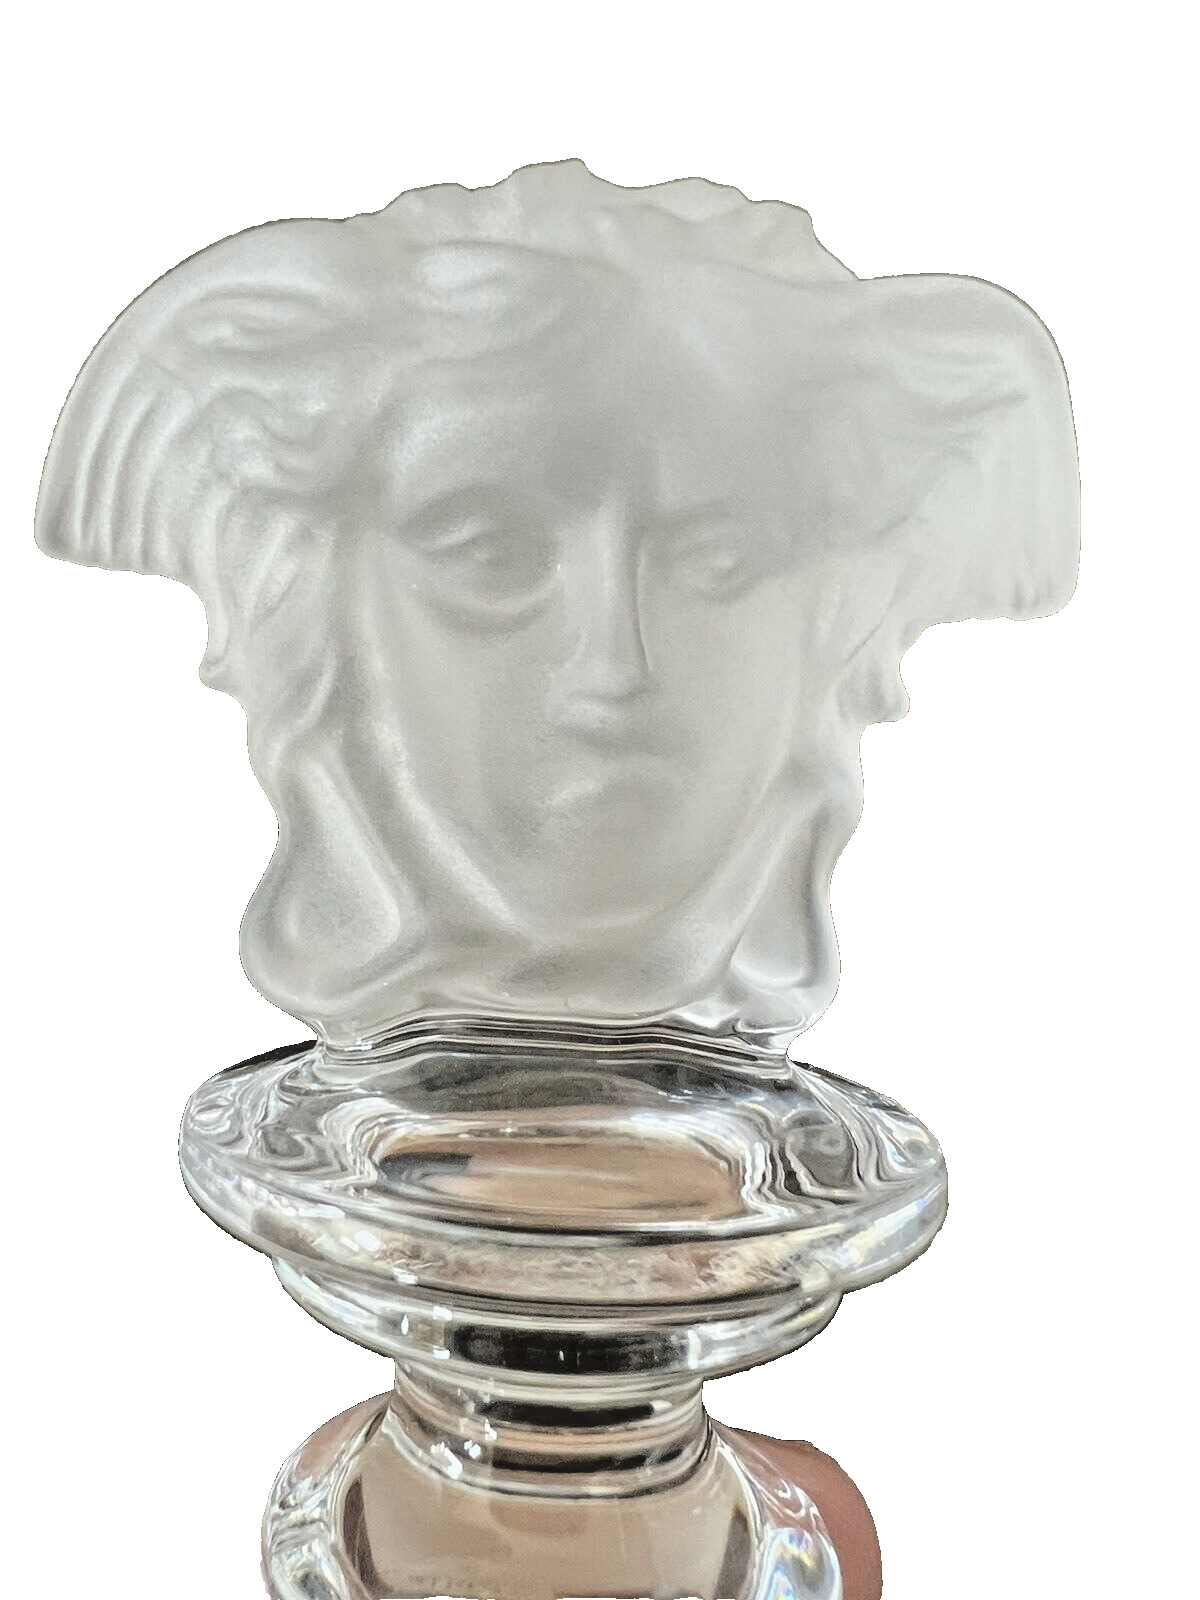 Versace Medusa Rosenthal Wine Stopper Boxed Certificate Of Authenticity Included